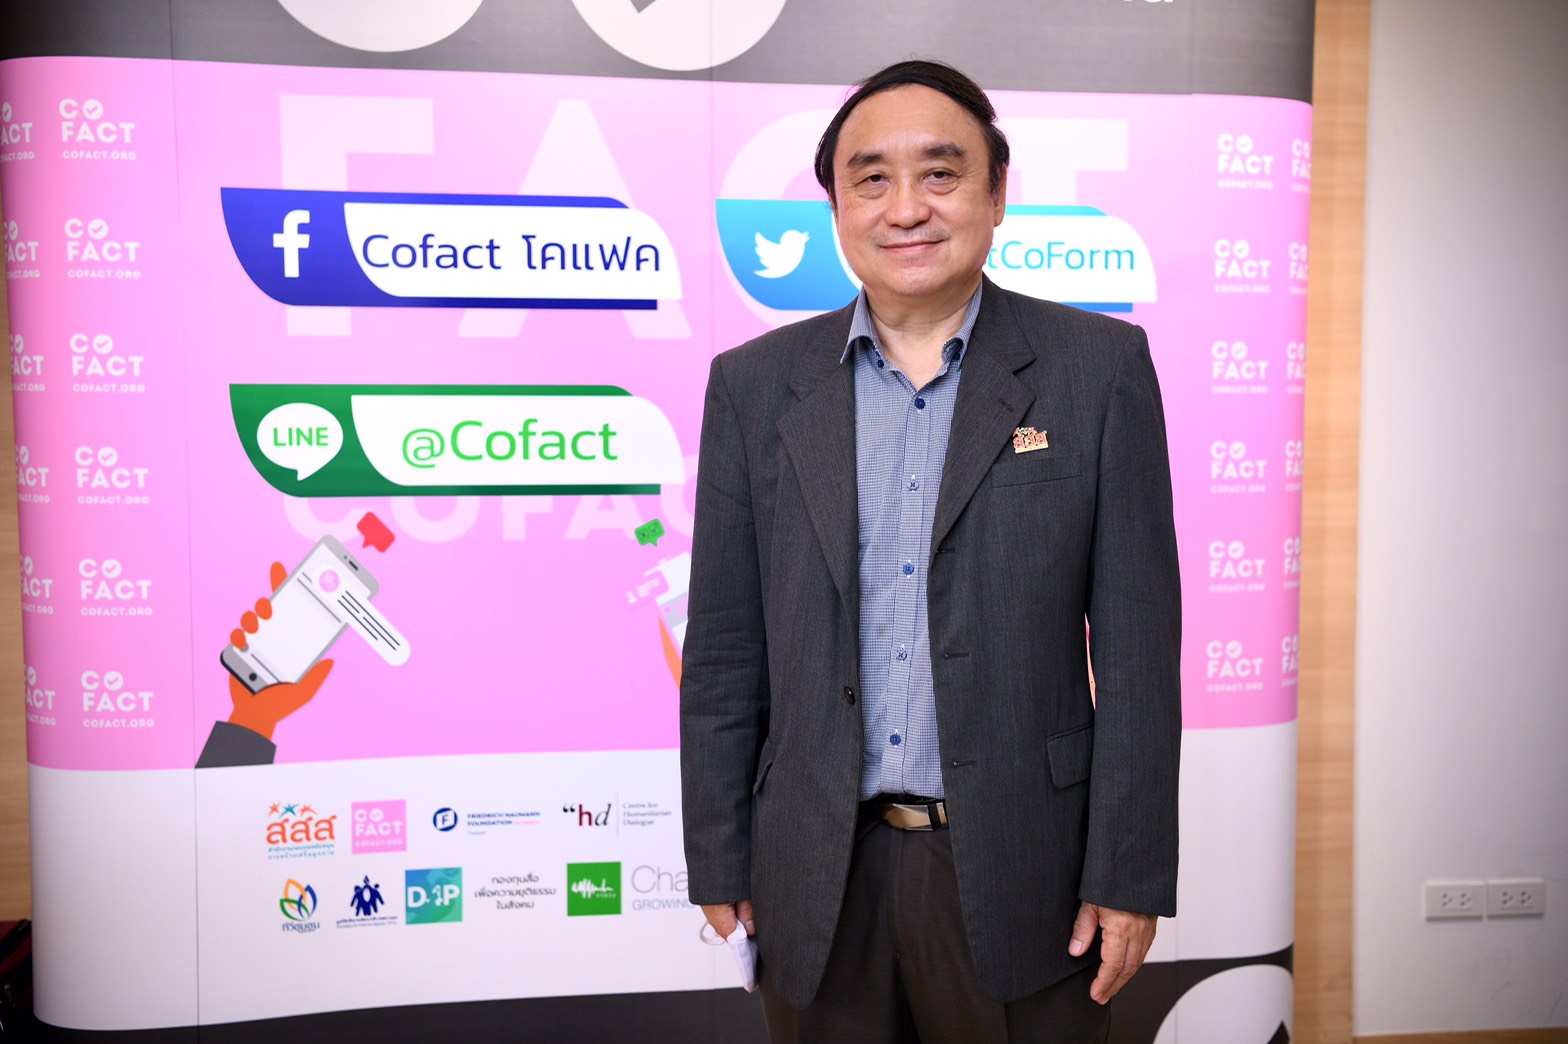 New innovation “CoFact” launched to fight fake news thaihealth